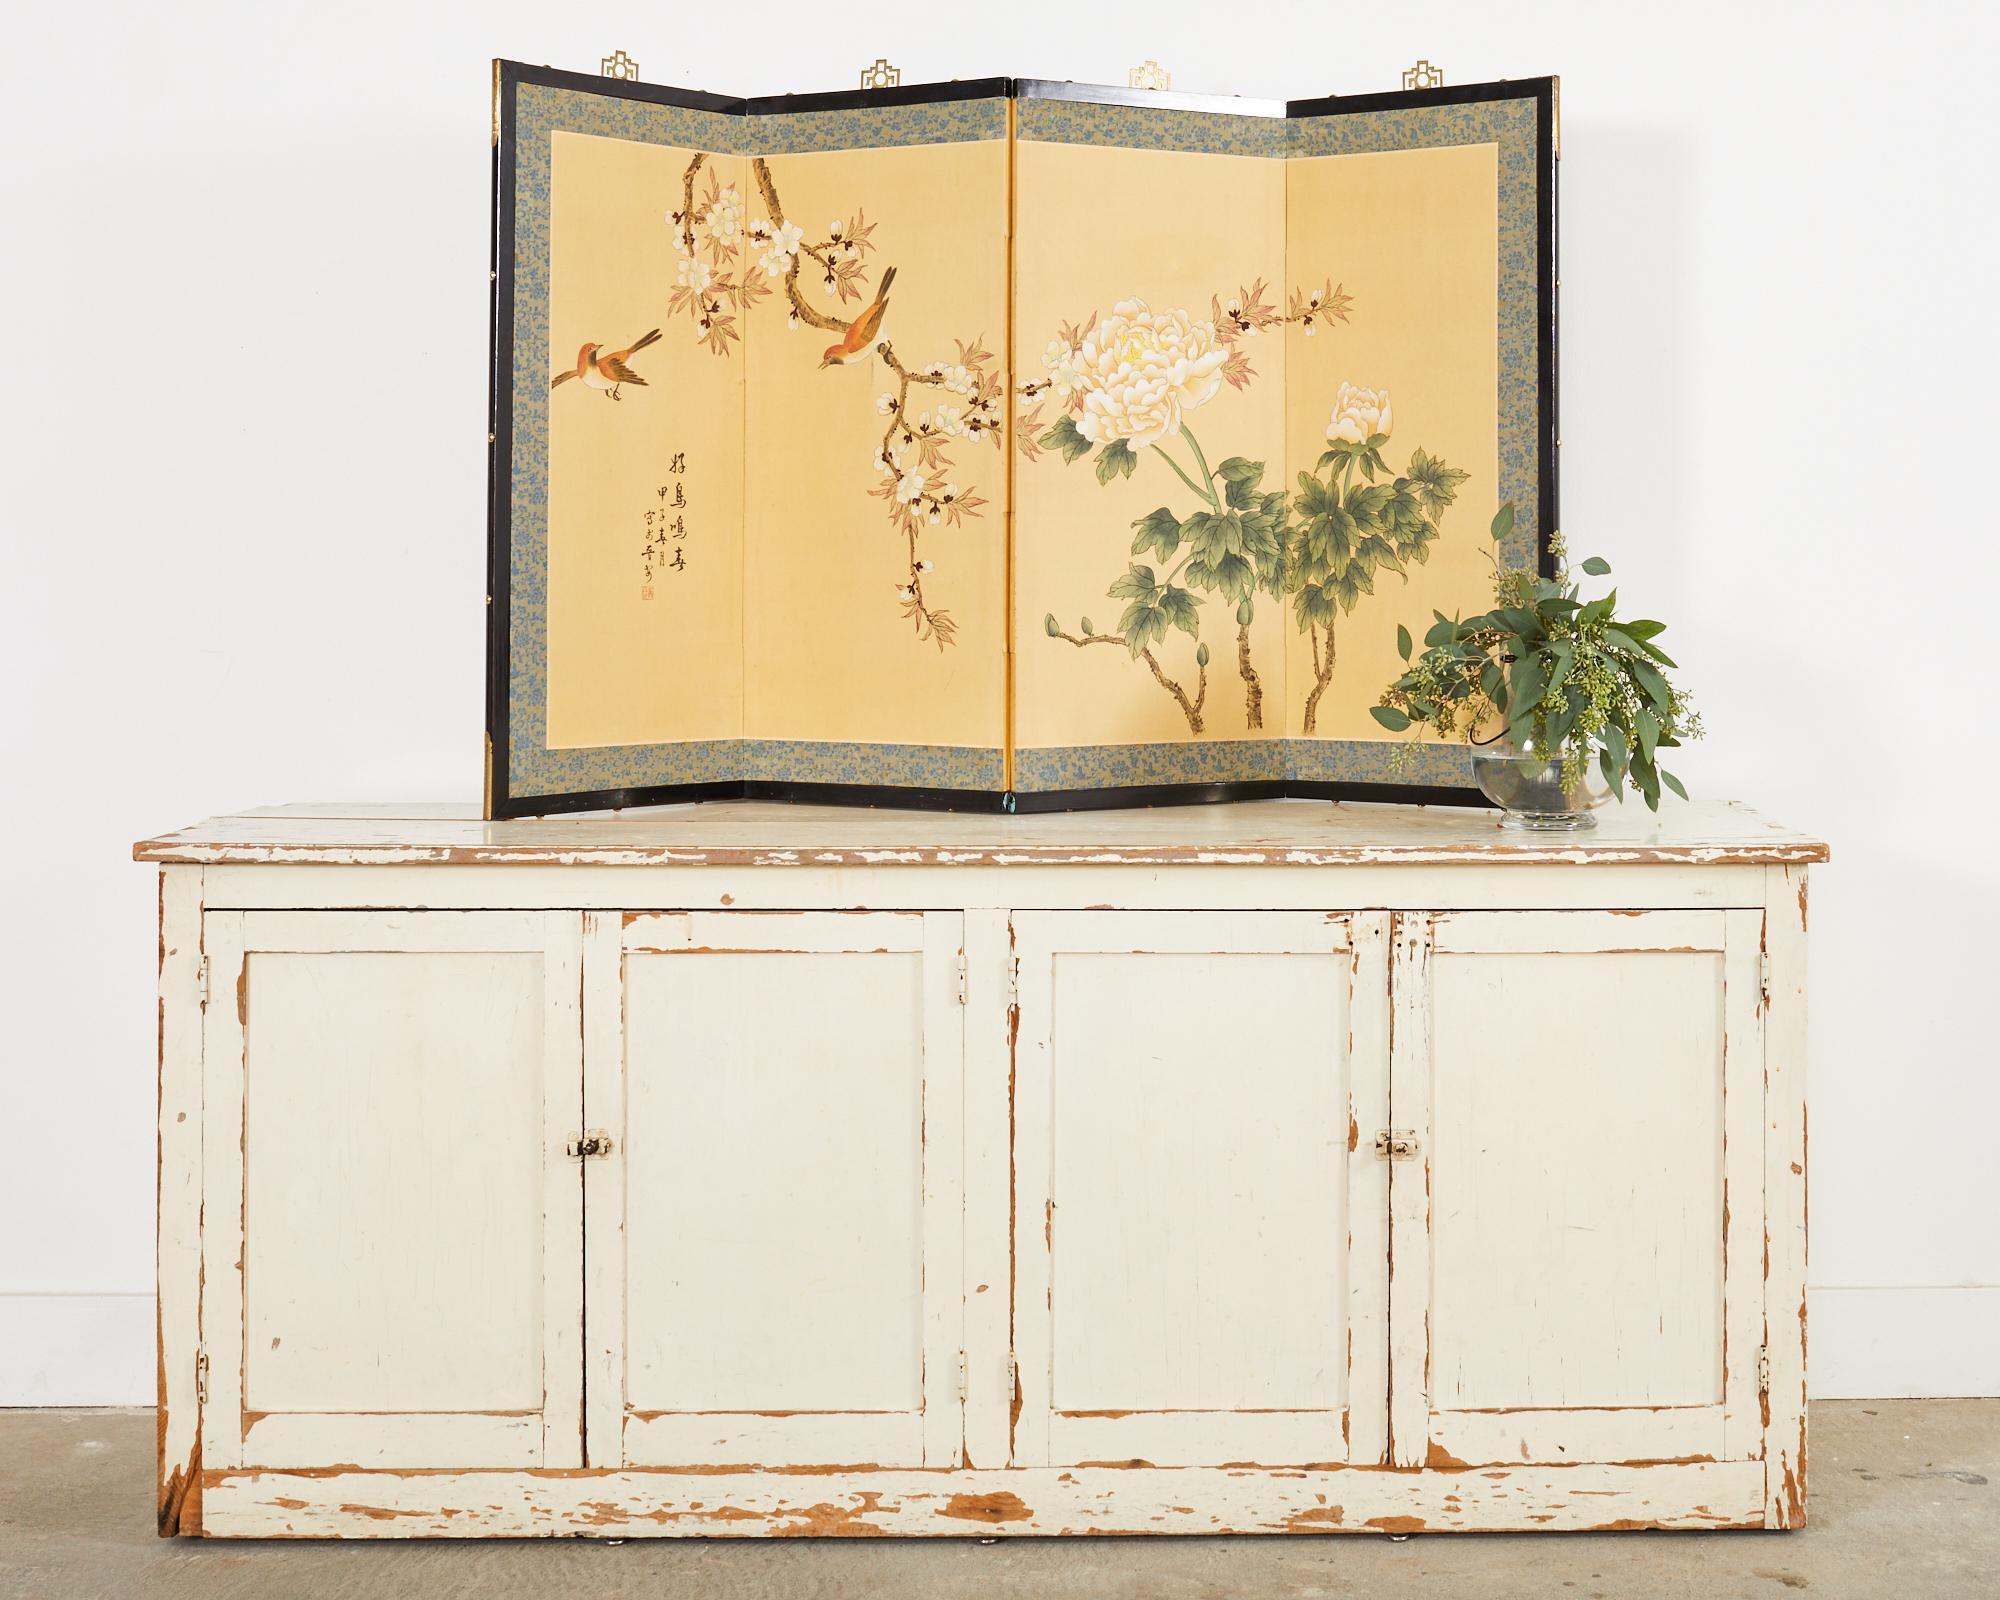 Attractive Japanese style folding four panel byobu screen from the late Showa period. The screen is titled friendly birds singing in spring and signed by an artist with a cyclical date of Jiazi or spring 1984. The scene depicts two birds in spring